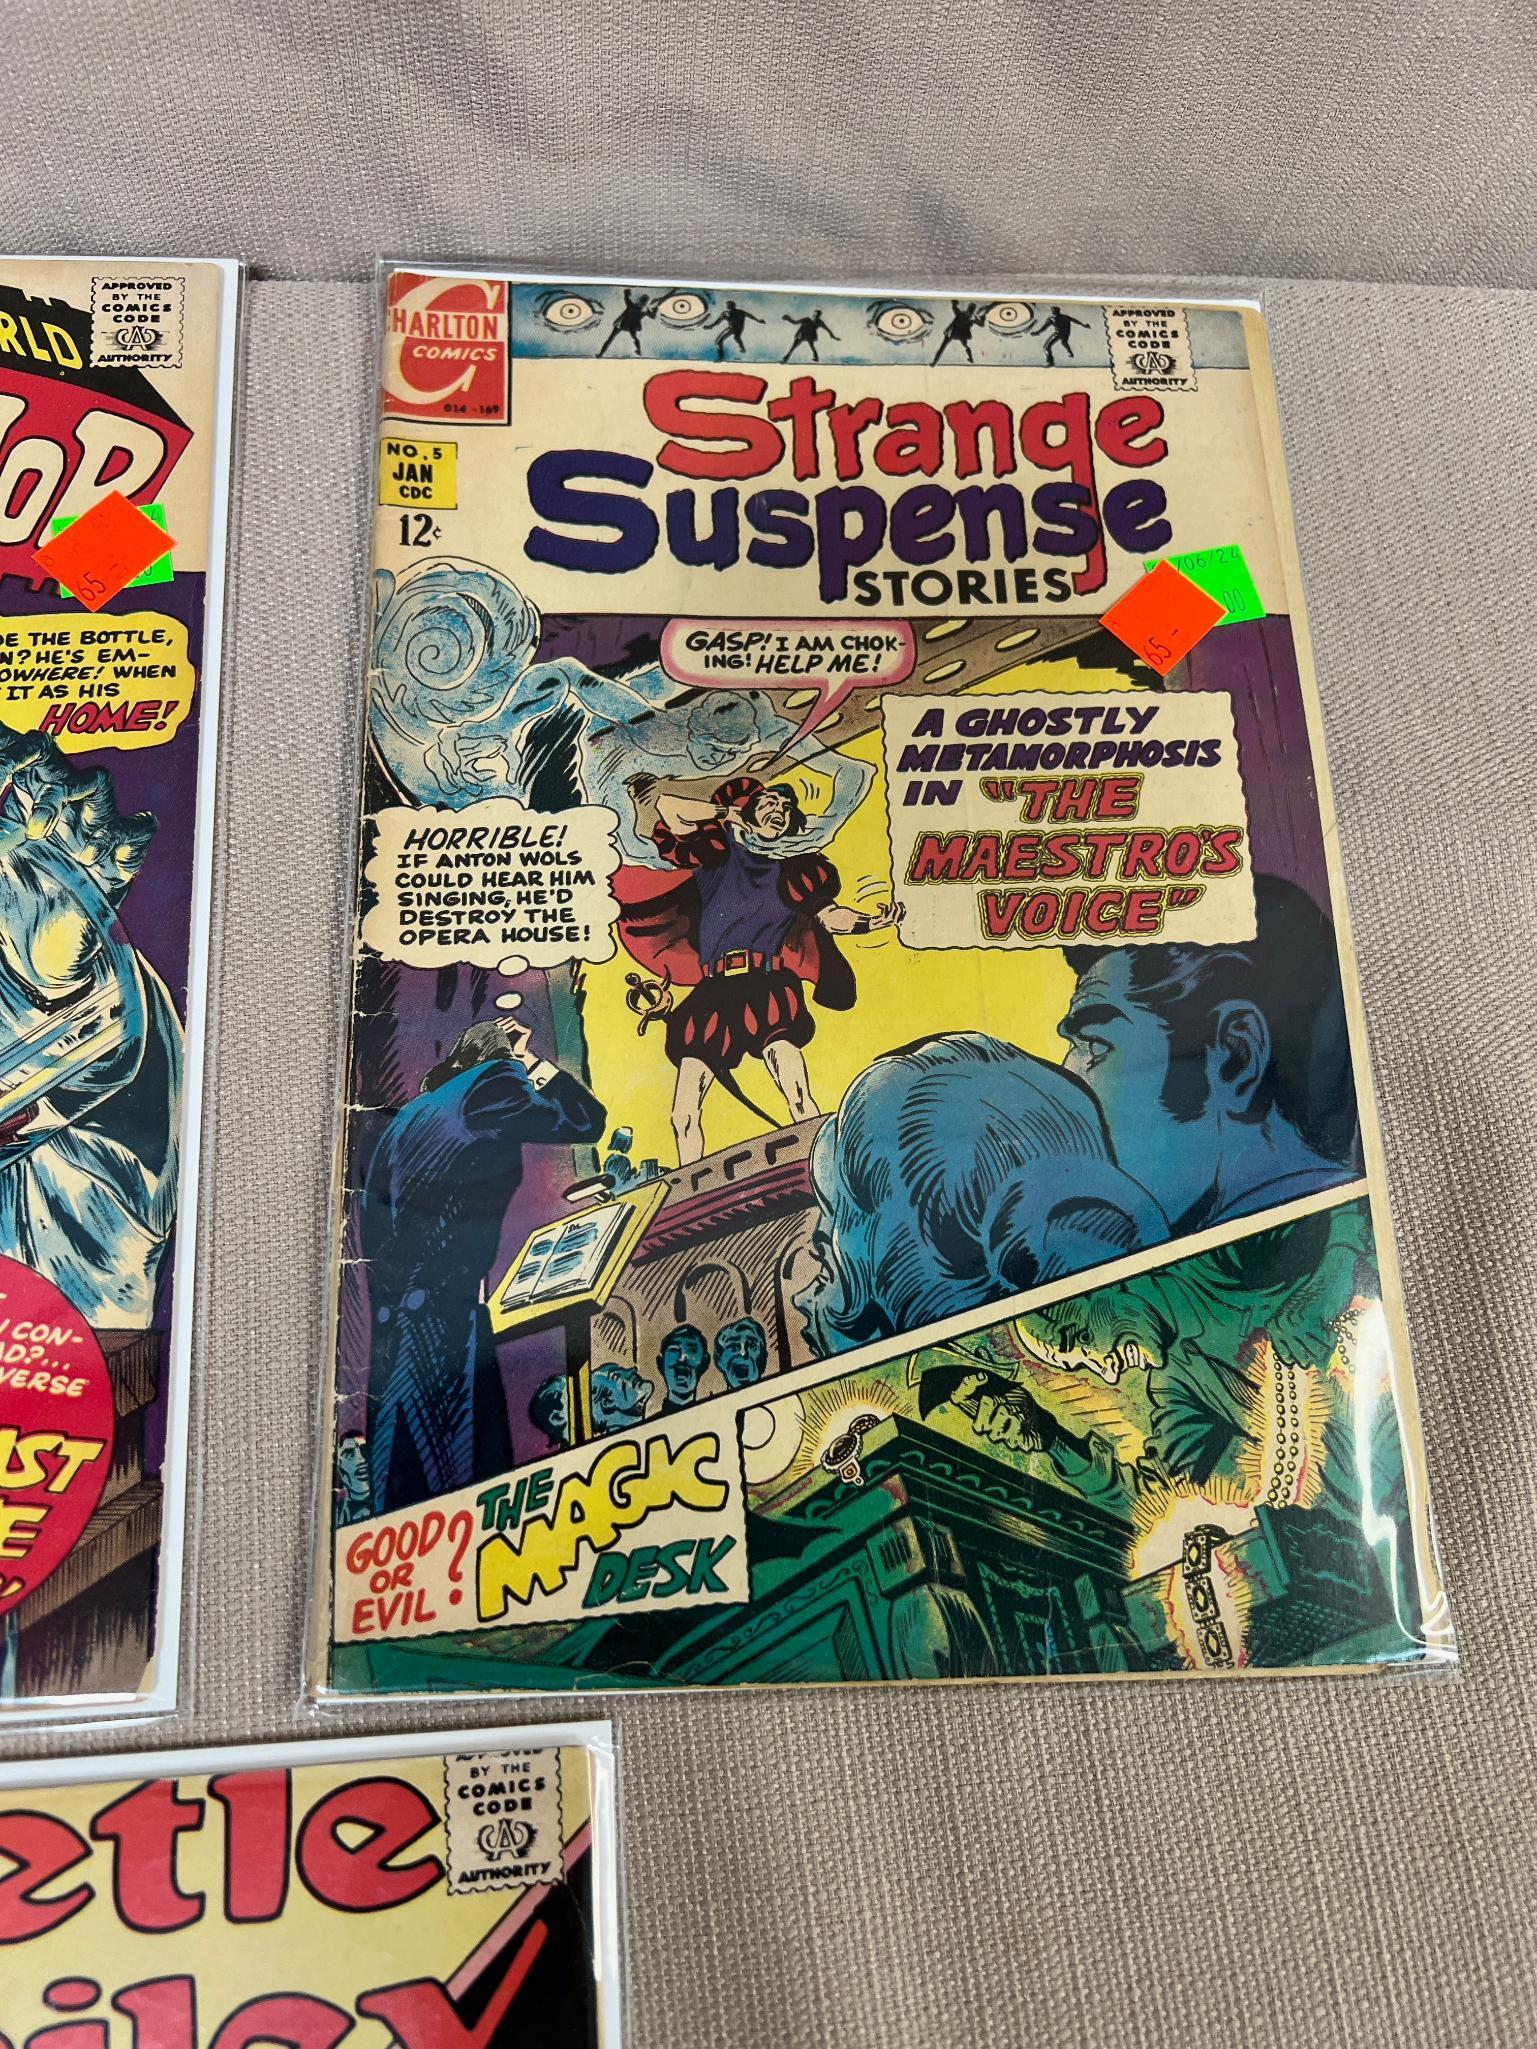 7- Early Charlton and Dell Comics, Abbott & Costello, Beverly Hillbillies and more